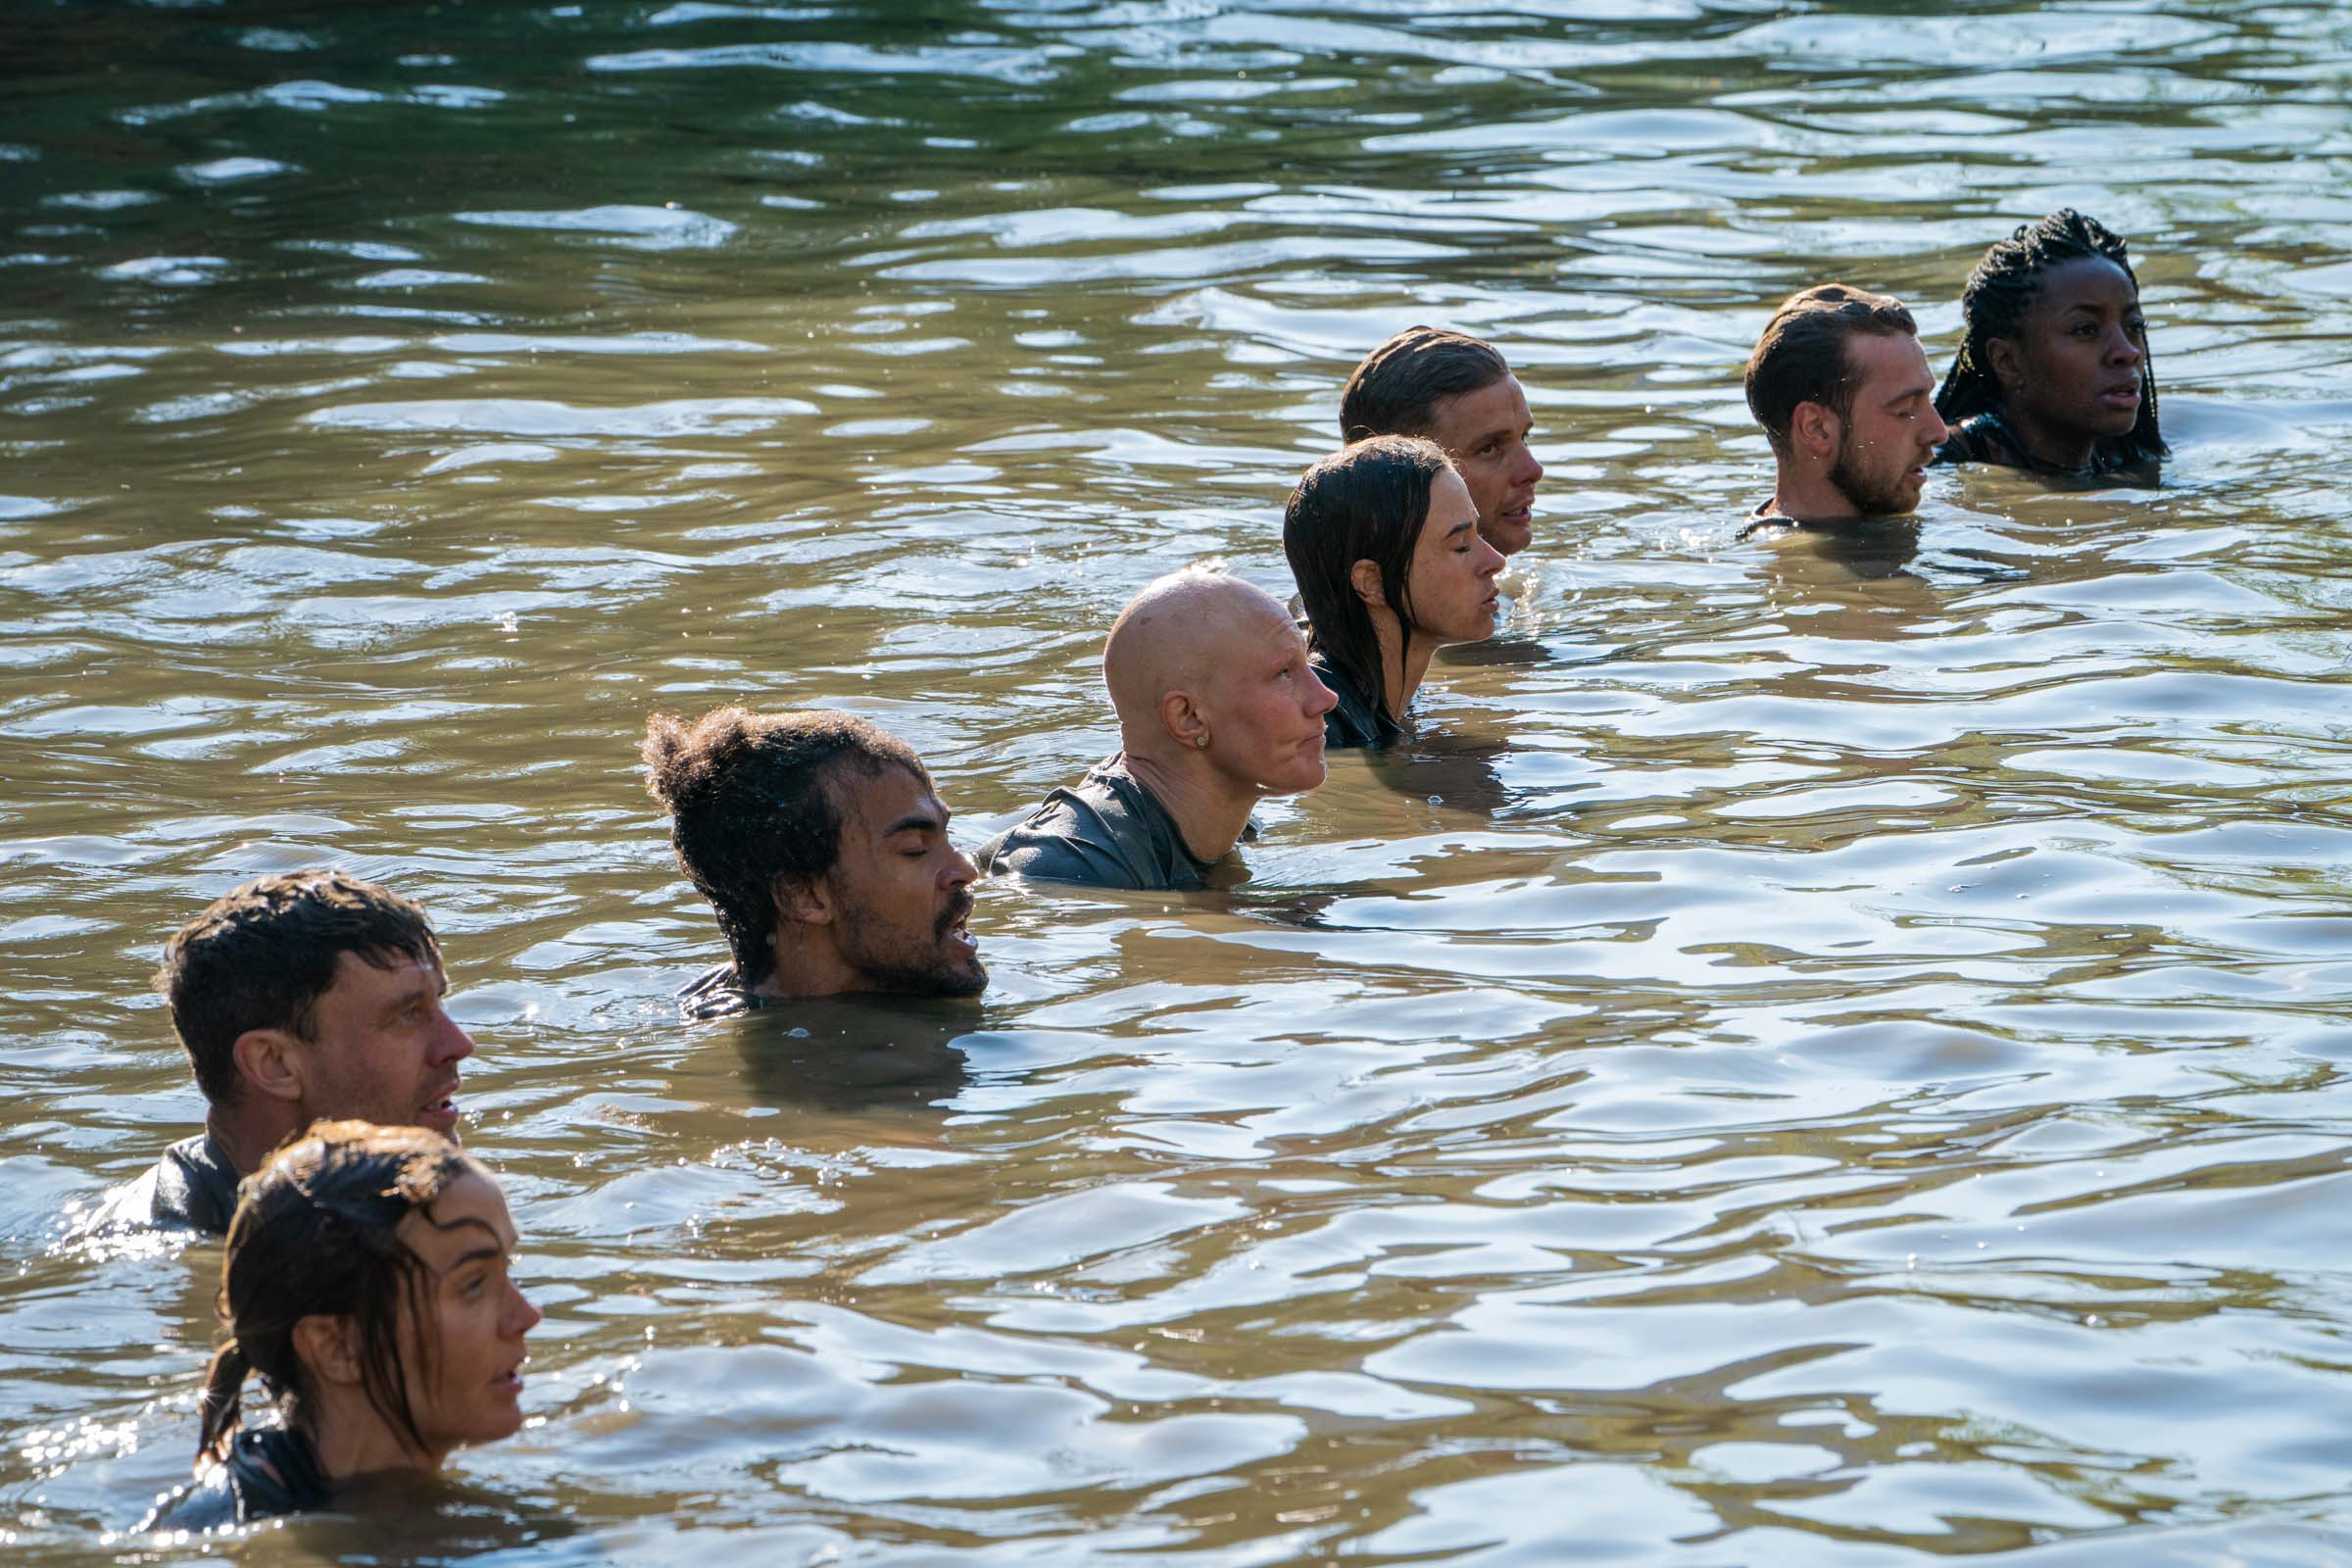  The Recruits submerge themselves during Water Butts  Episode 2  Minnow Films / Channel 4 